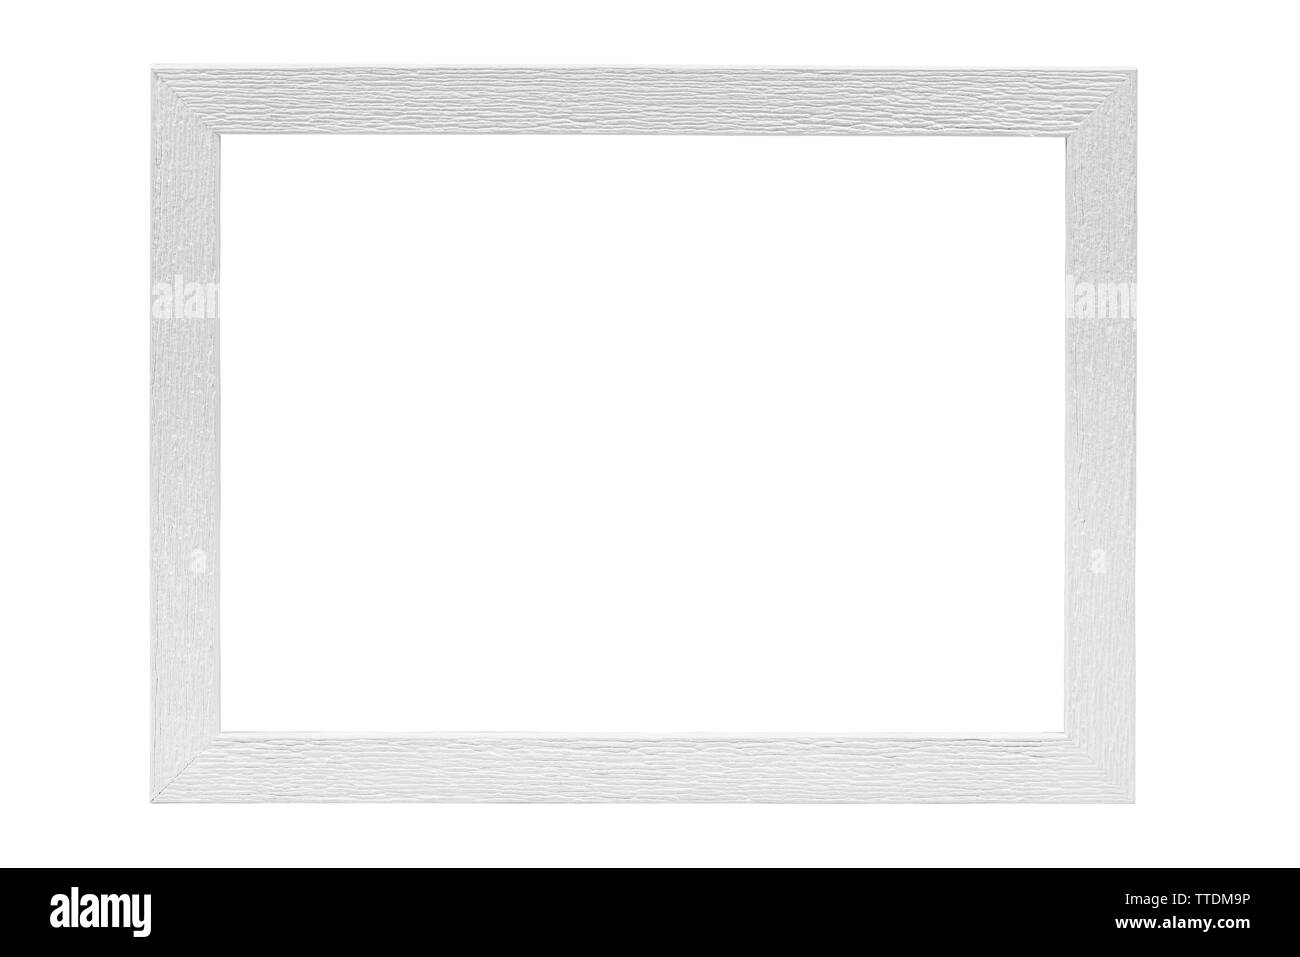 Vertical white wooden picture frame isolated on white background with clipping path Stock Photo